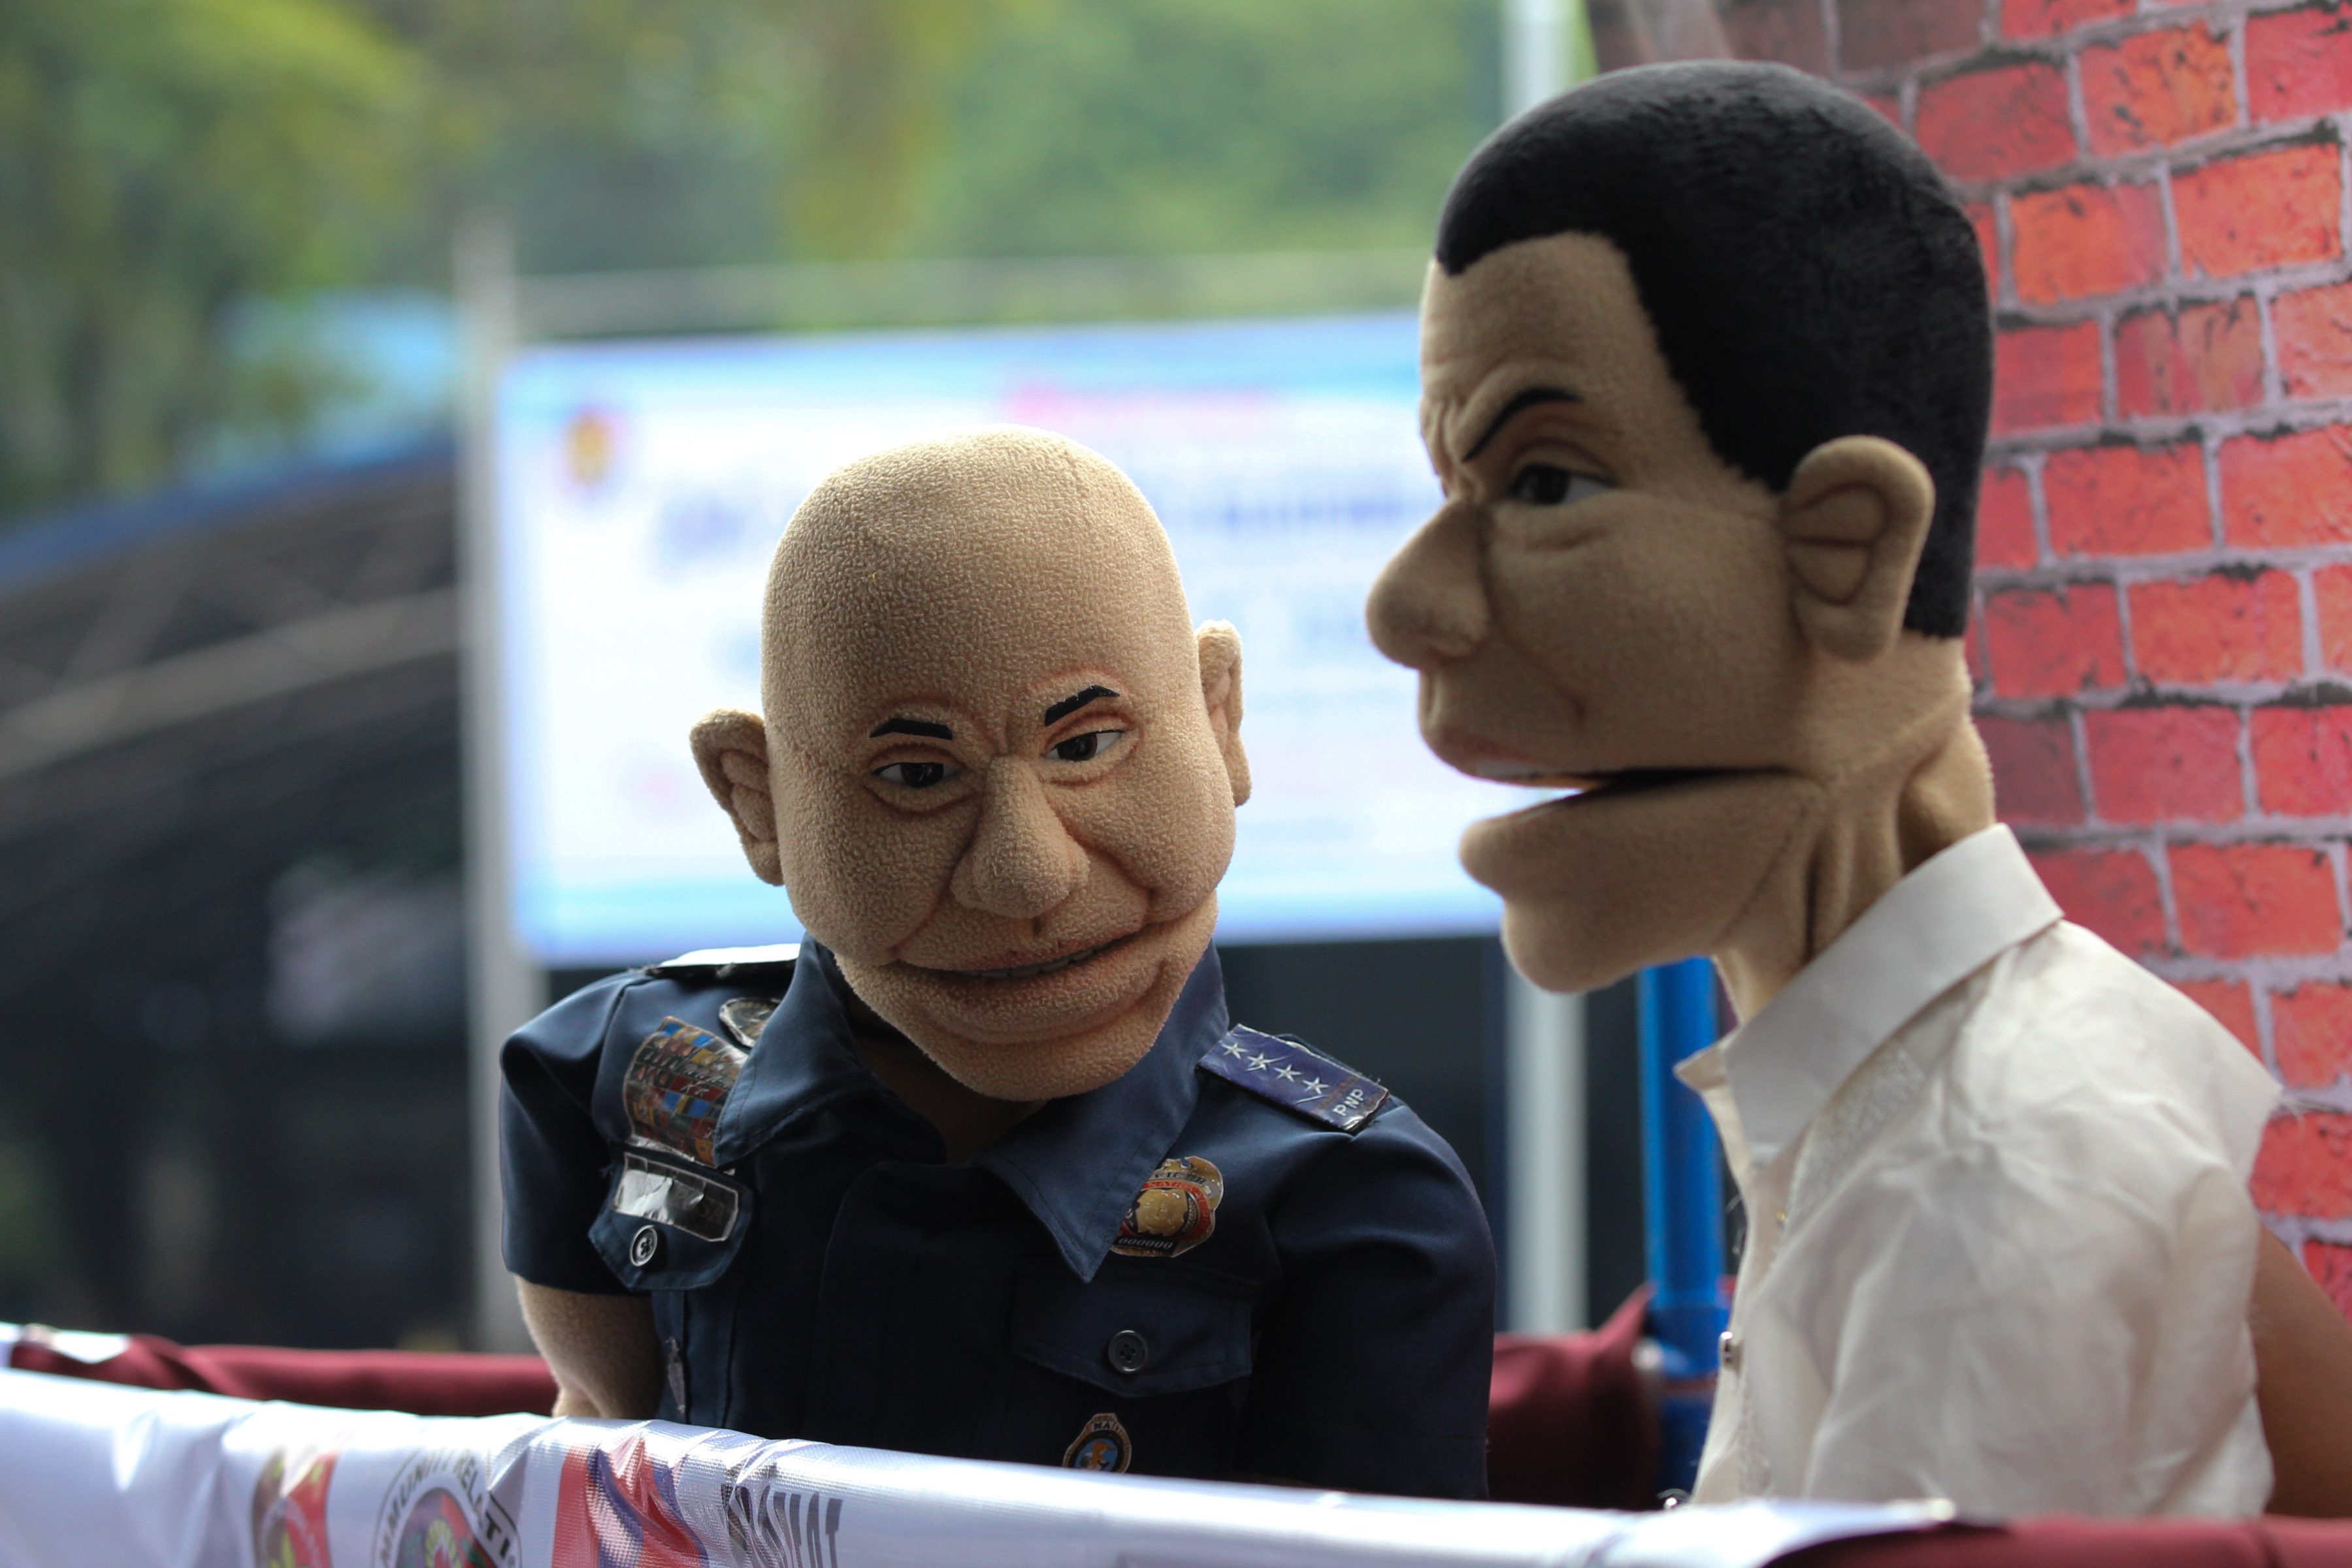 MEET THE PUPPETS. The puppet versions of PNP chief Ronald dela Rosa and President Rodrigo Duterte are introduced during the 24th founding anniversary of the Police Community Relations Group at Camp Crame on August 1, 2016. The puppets will be used for the anti-drug campaign of the PNP. Photo by Toto Lozano/PPD 